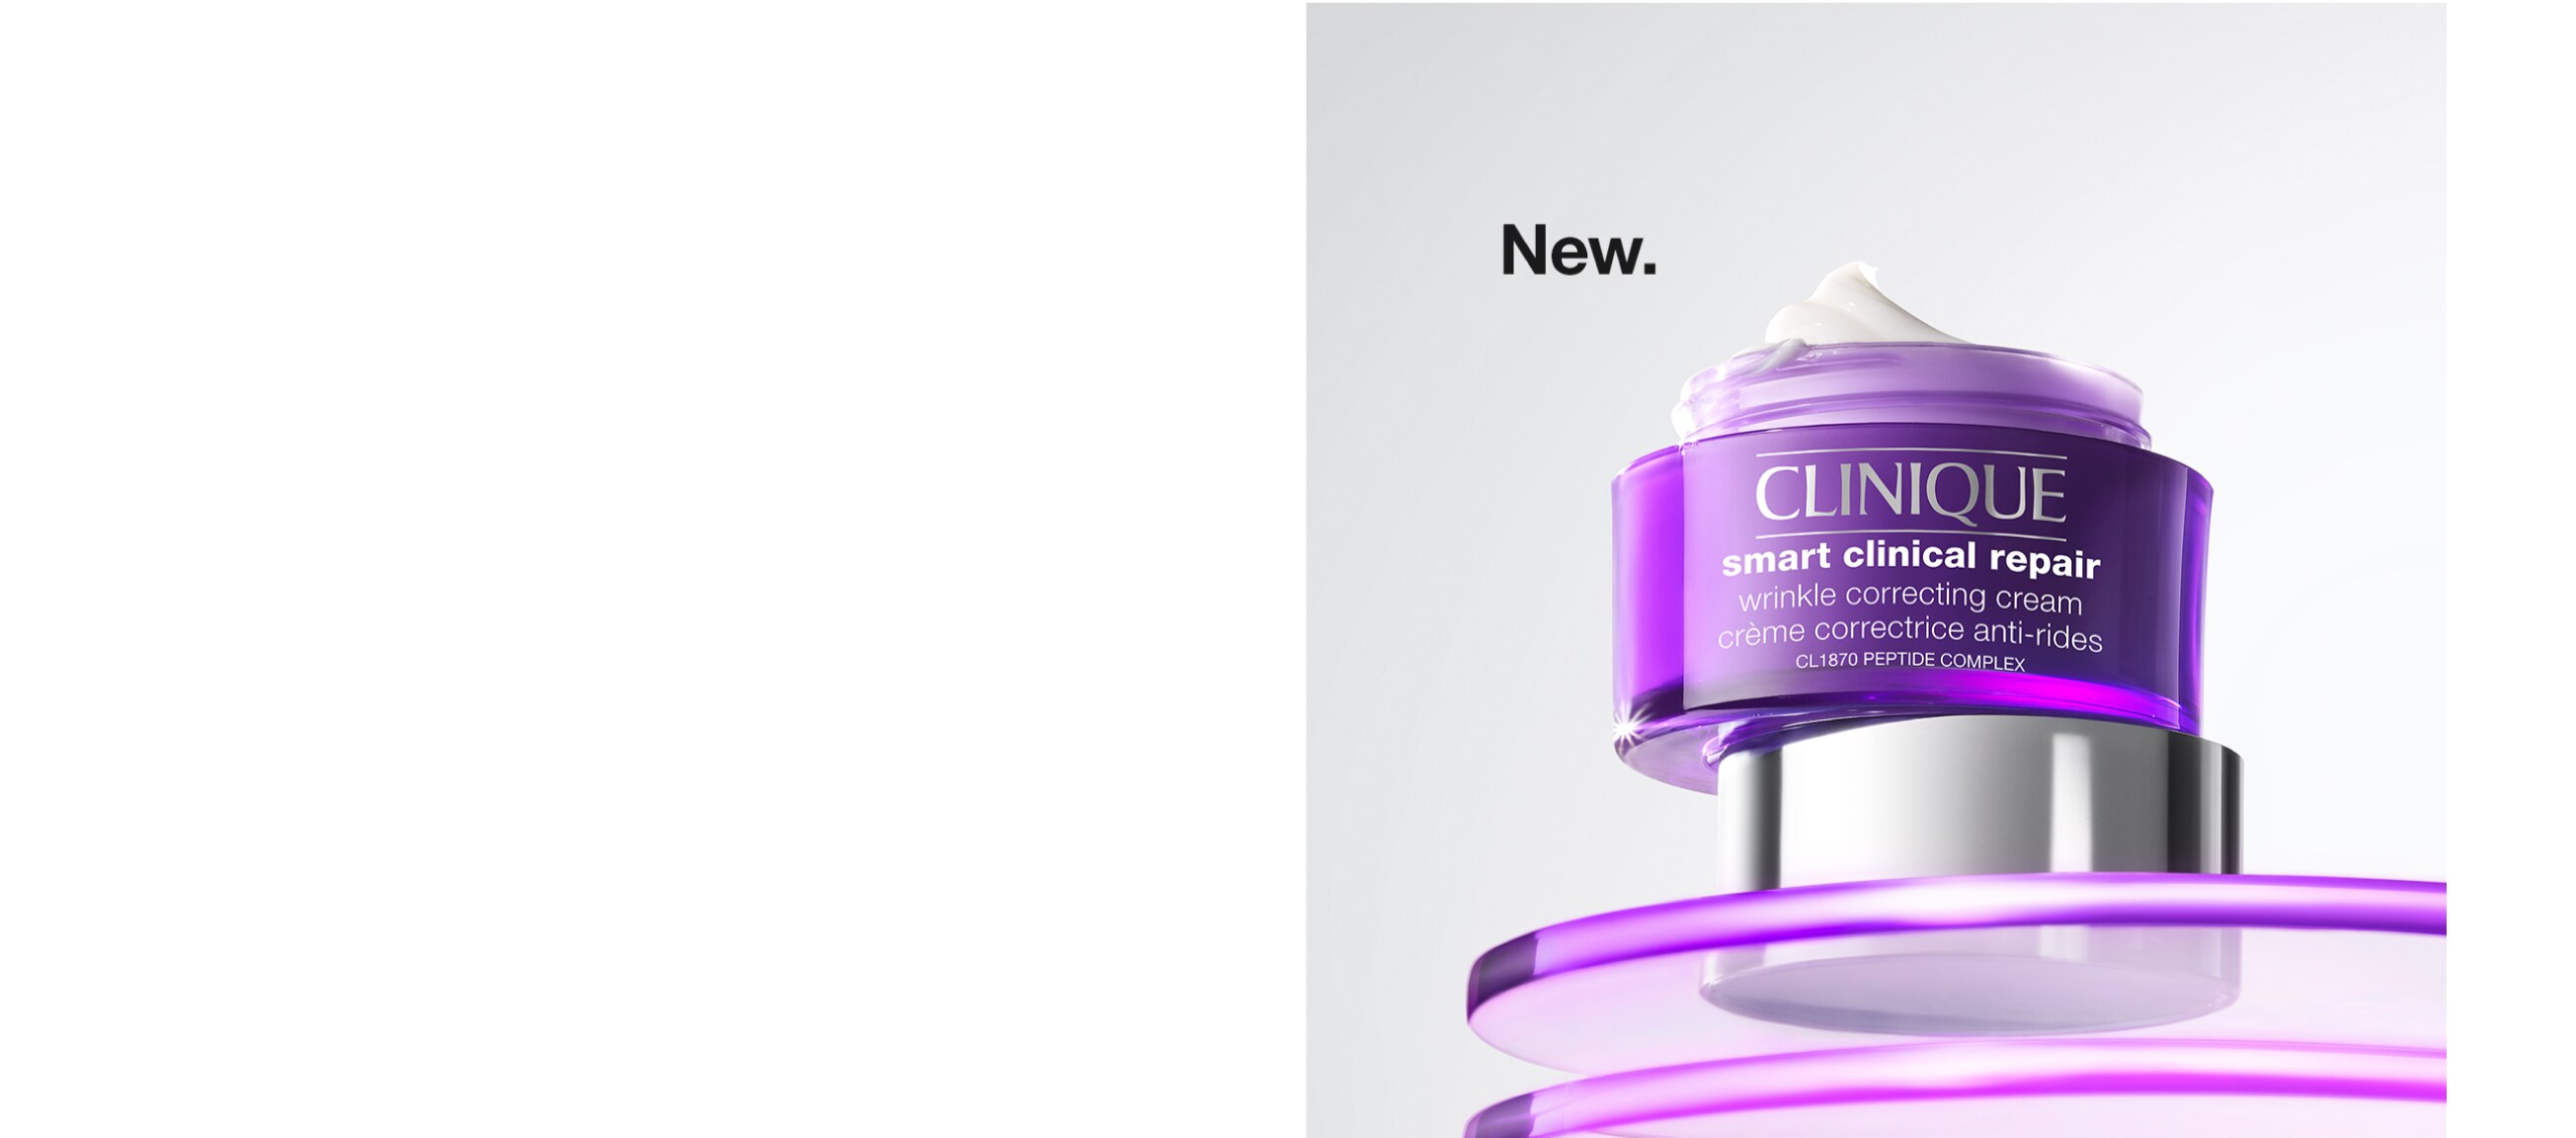 A new way to fight wrinkles.